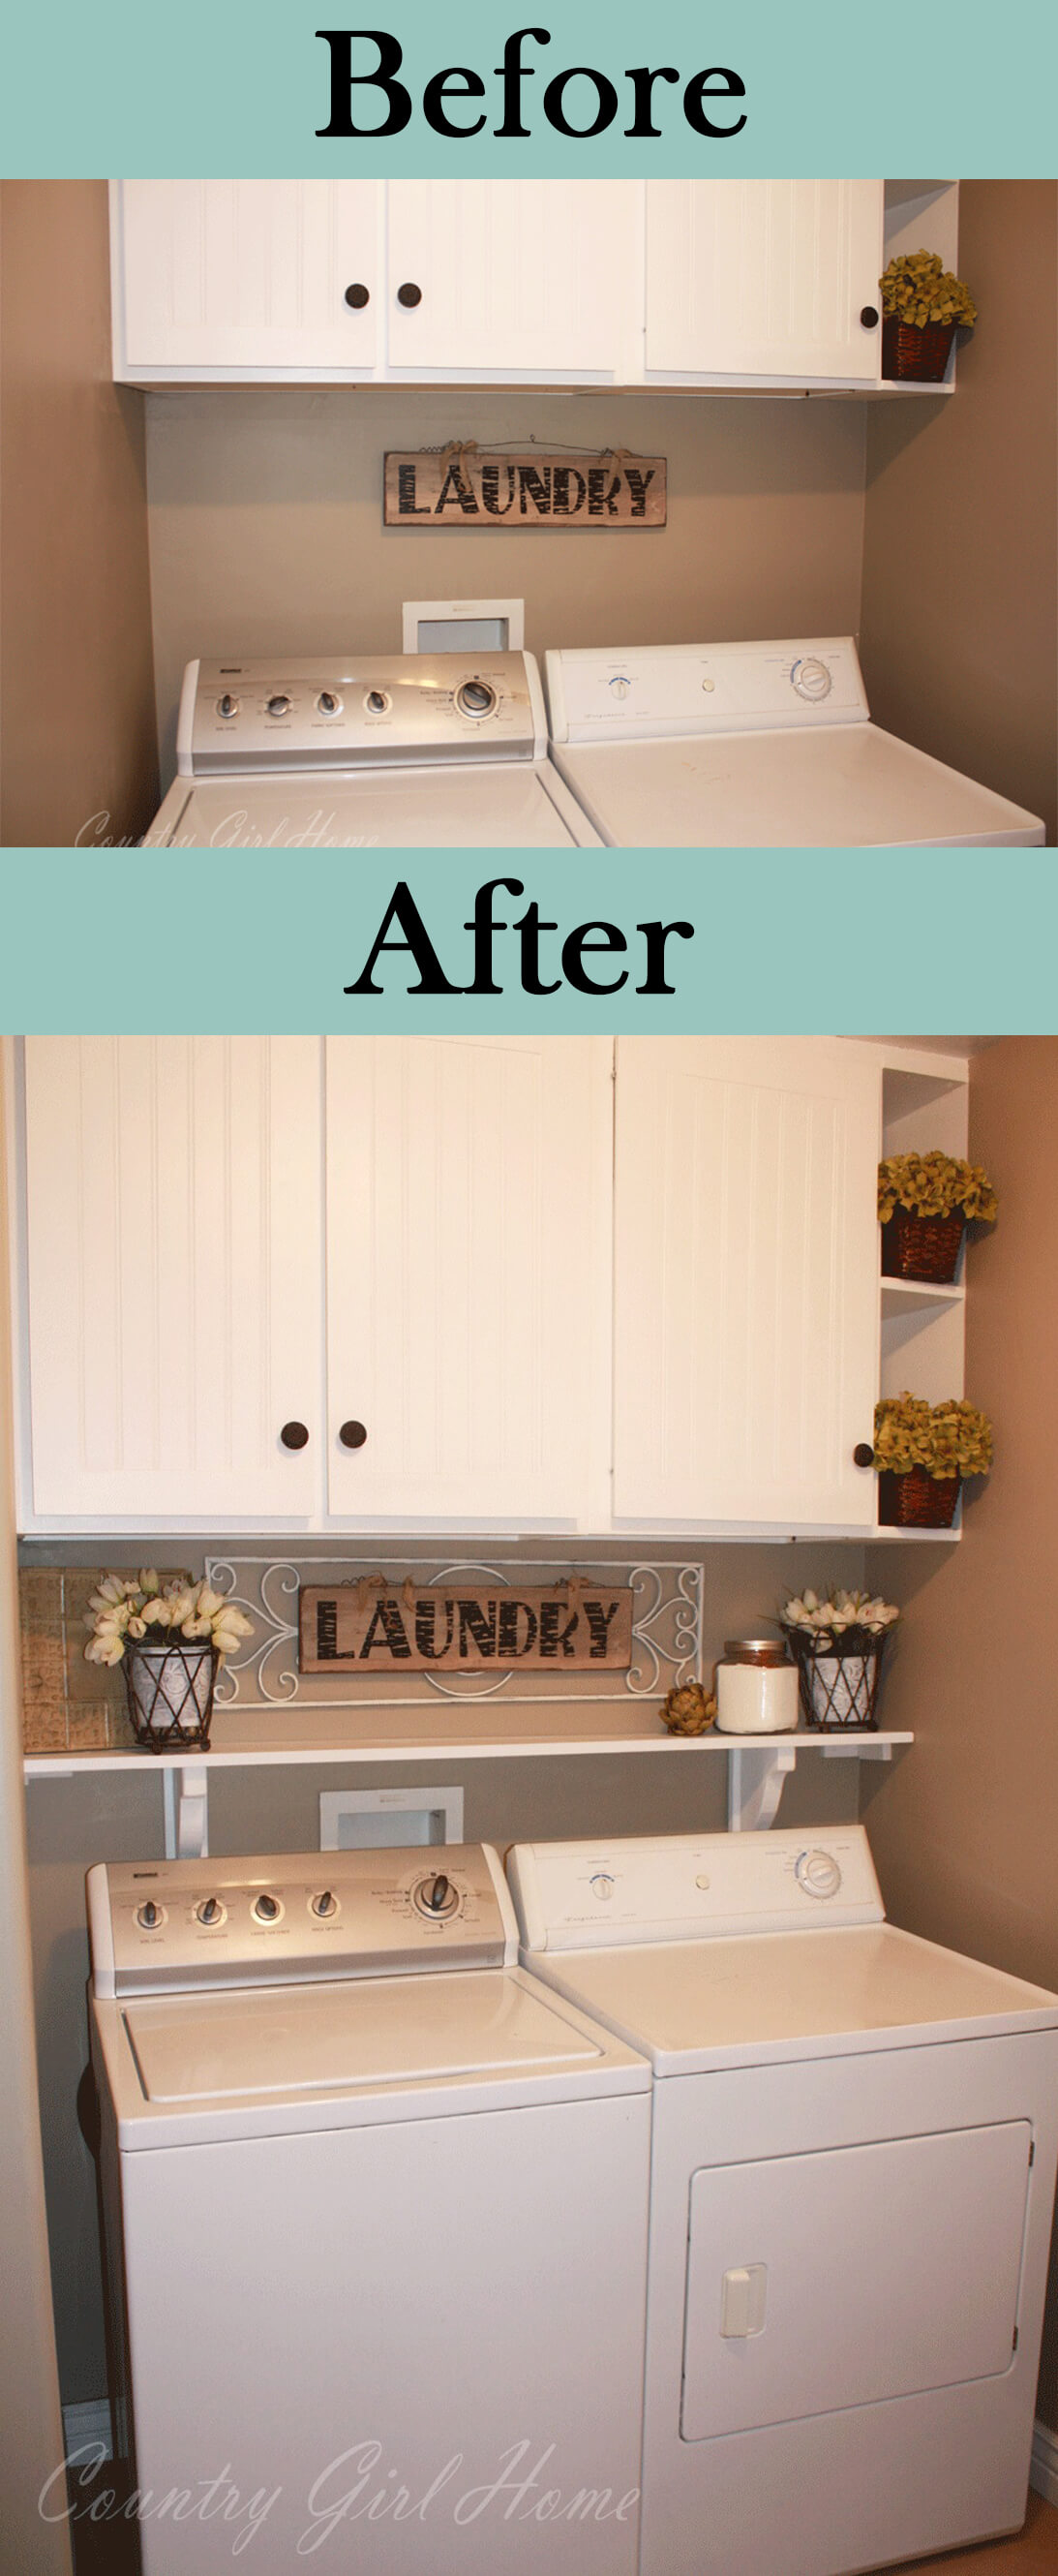 06 Budget Friendly Laundry Room Makeover Ideas Before After Homebnc 